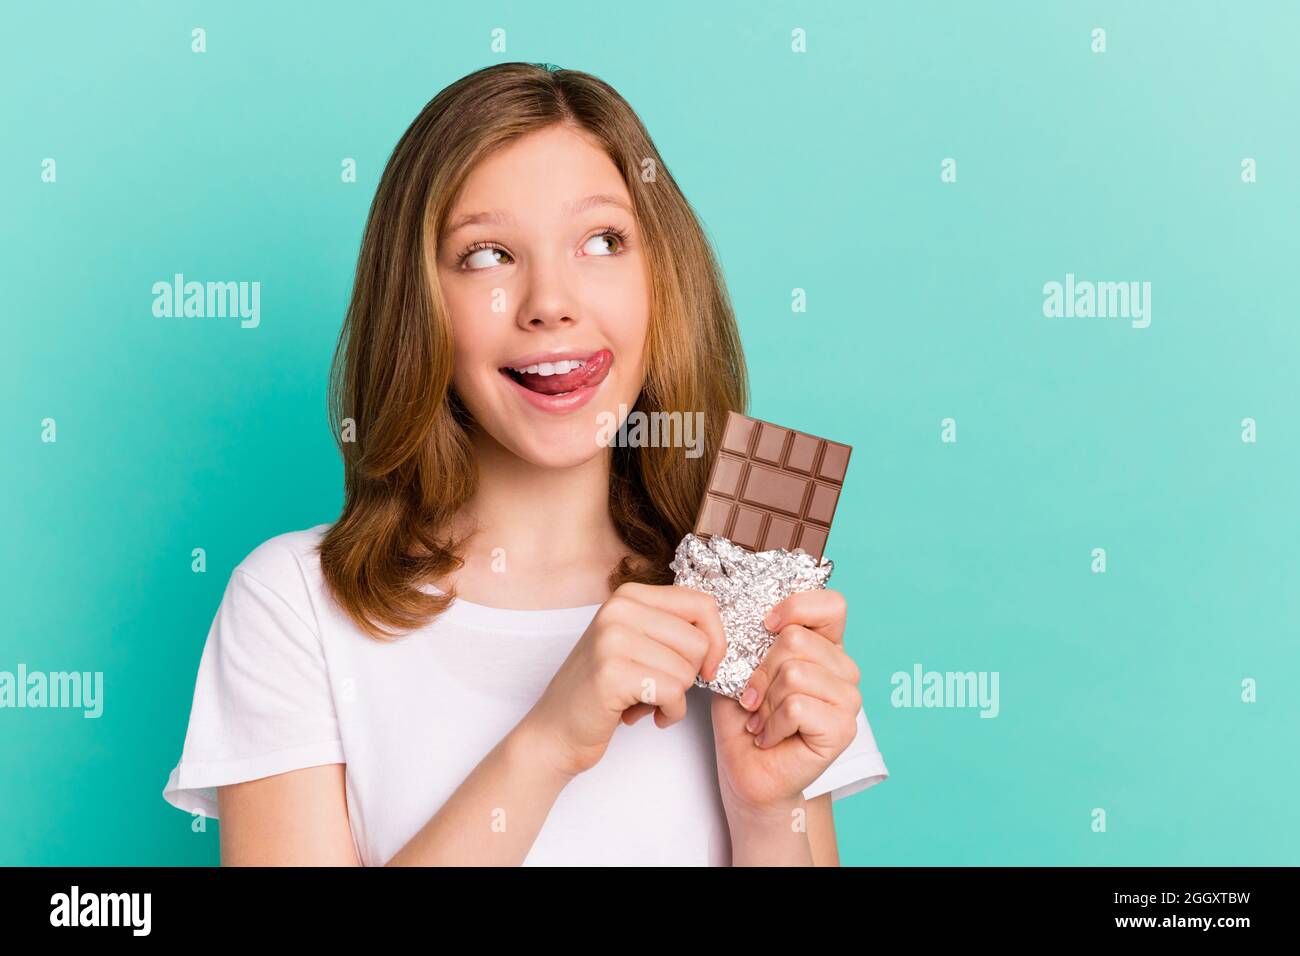 Photo portrait girl smiling happy eating chocolate plate licking lip looking copyspace isolated vivid teal color background Stock Photo